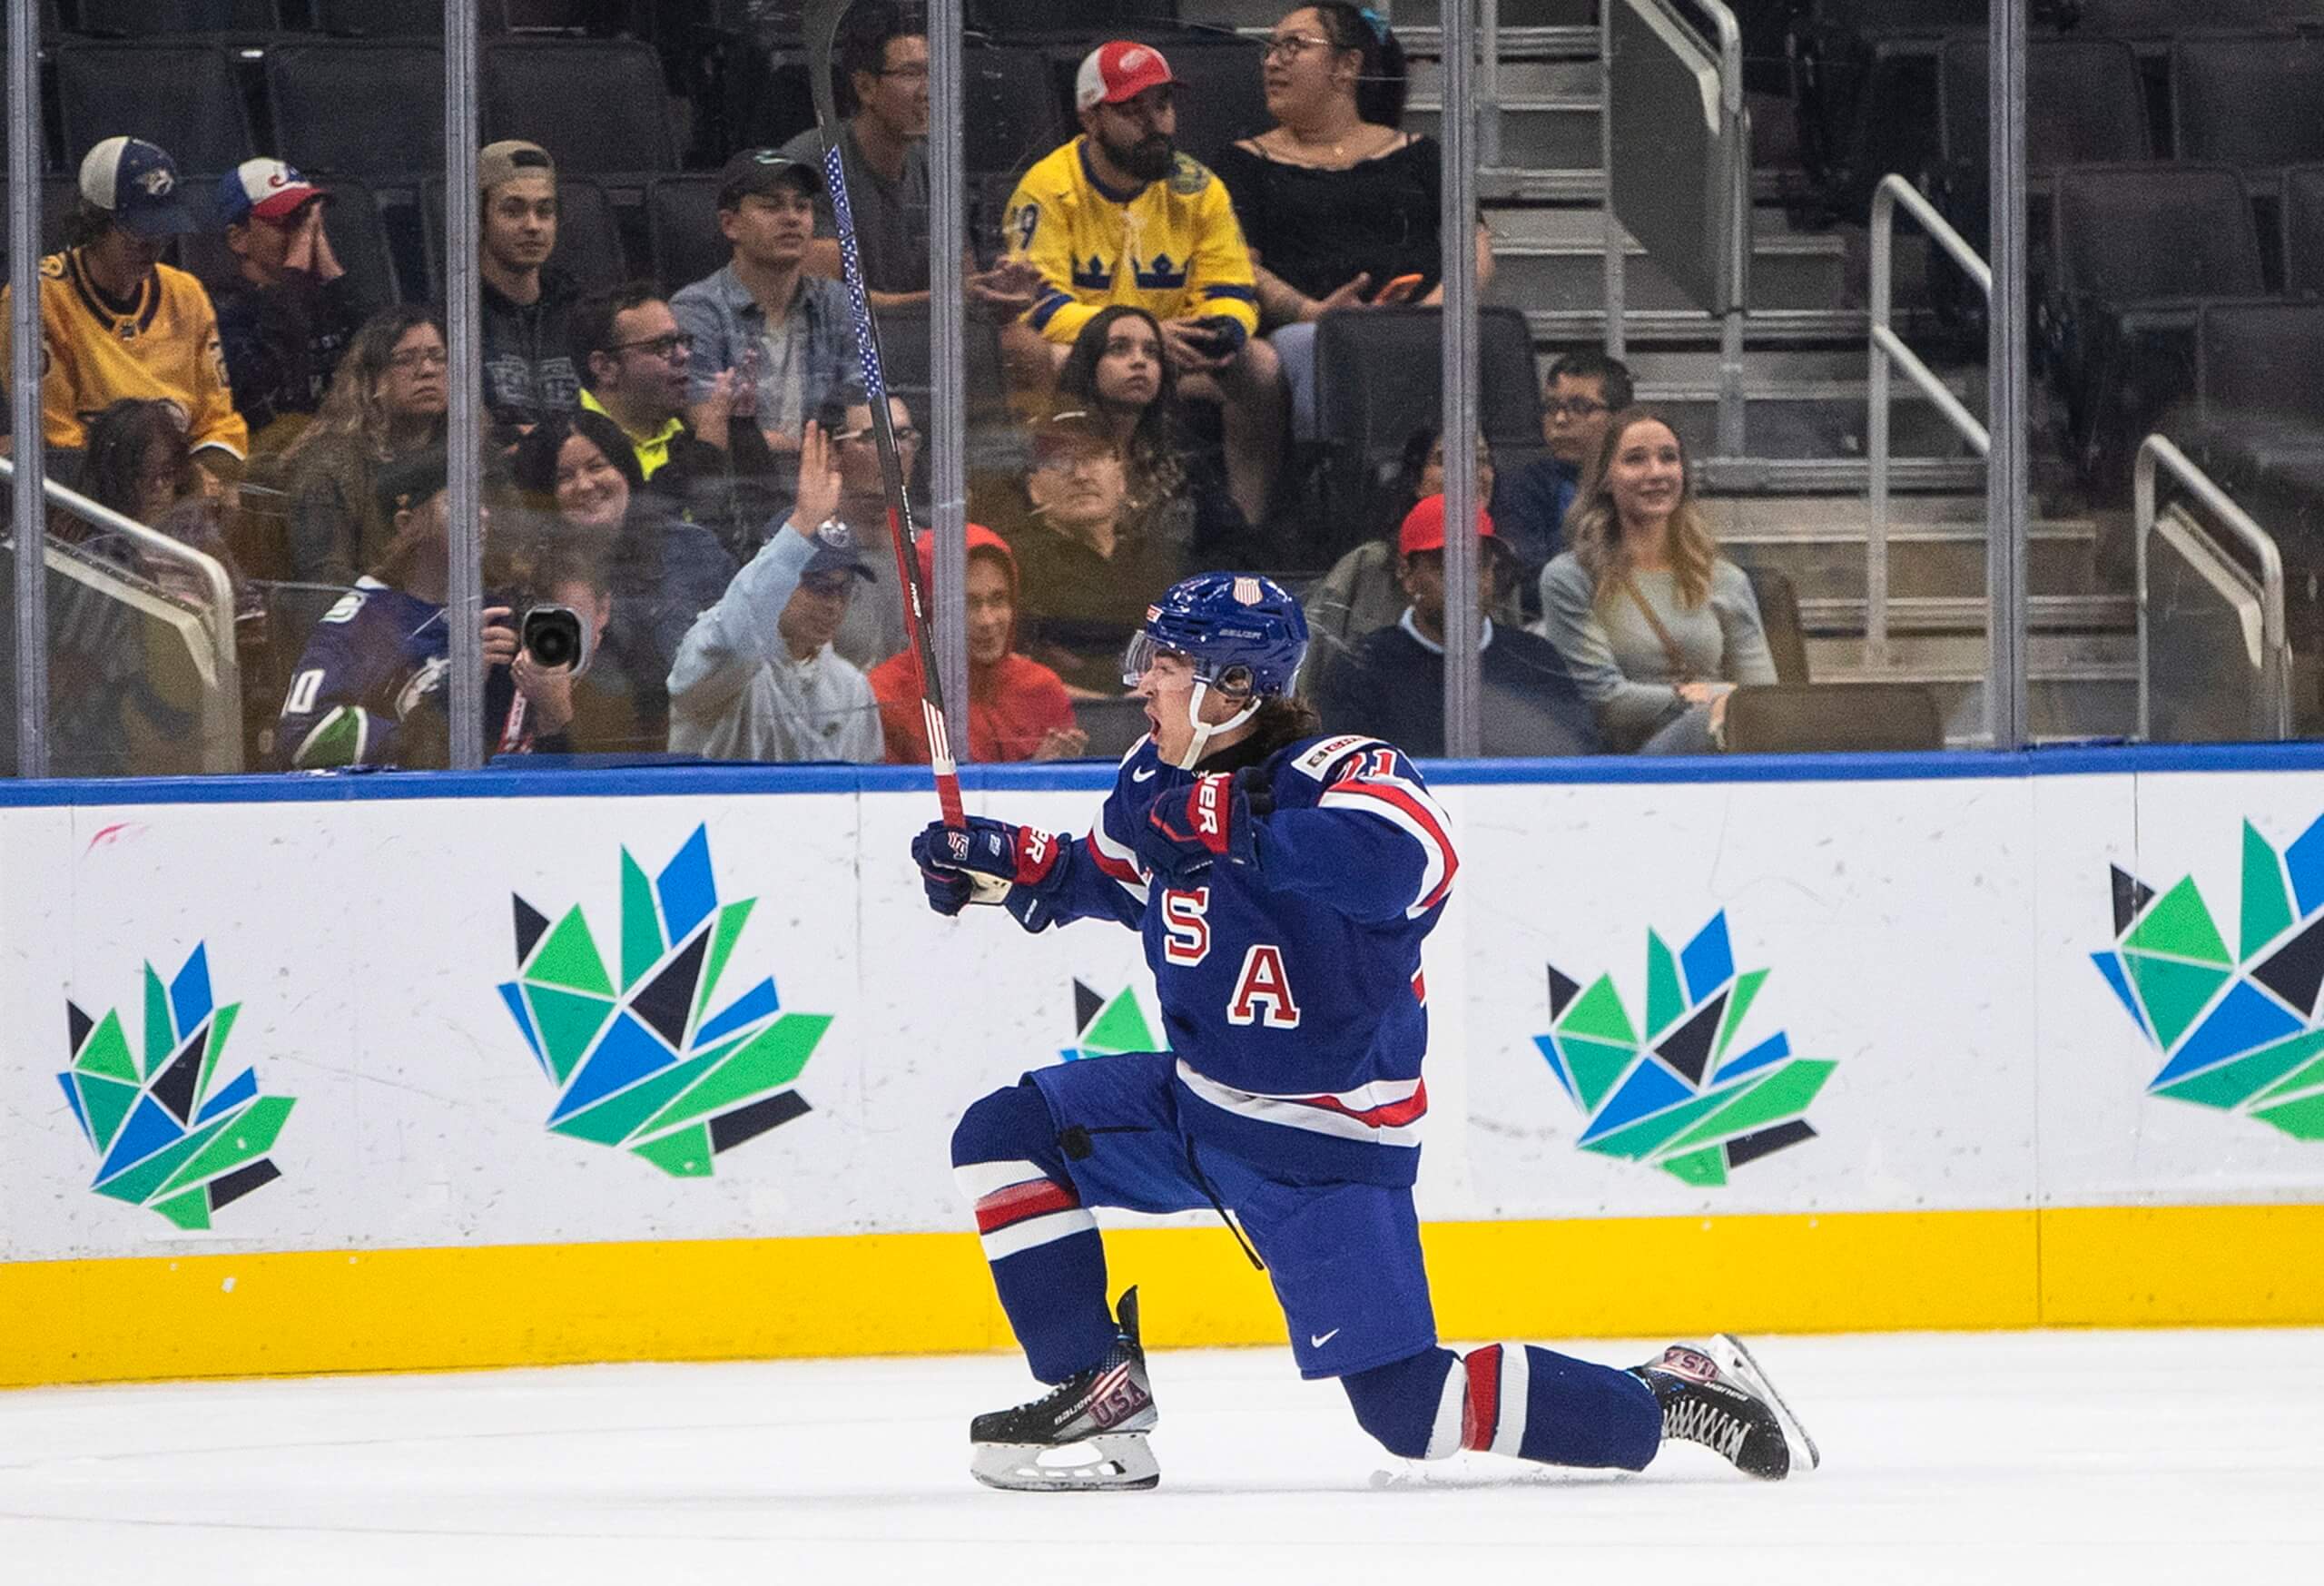 New York Rangers: How good are Rangers prospects? - Page 4